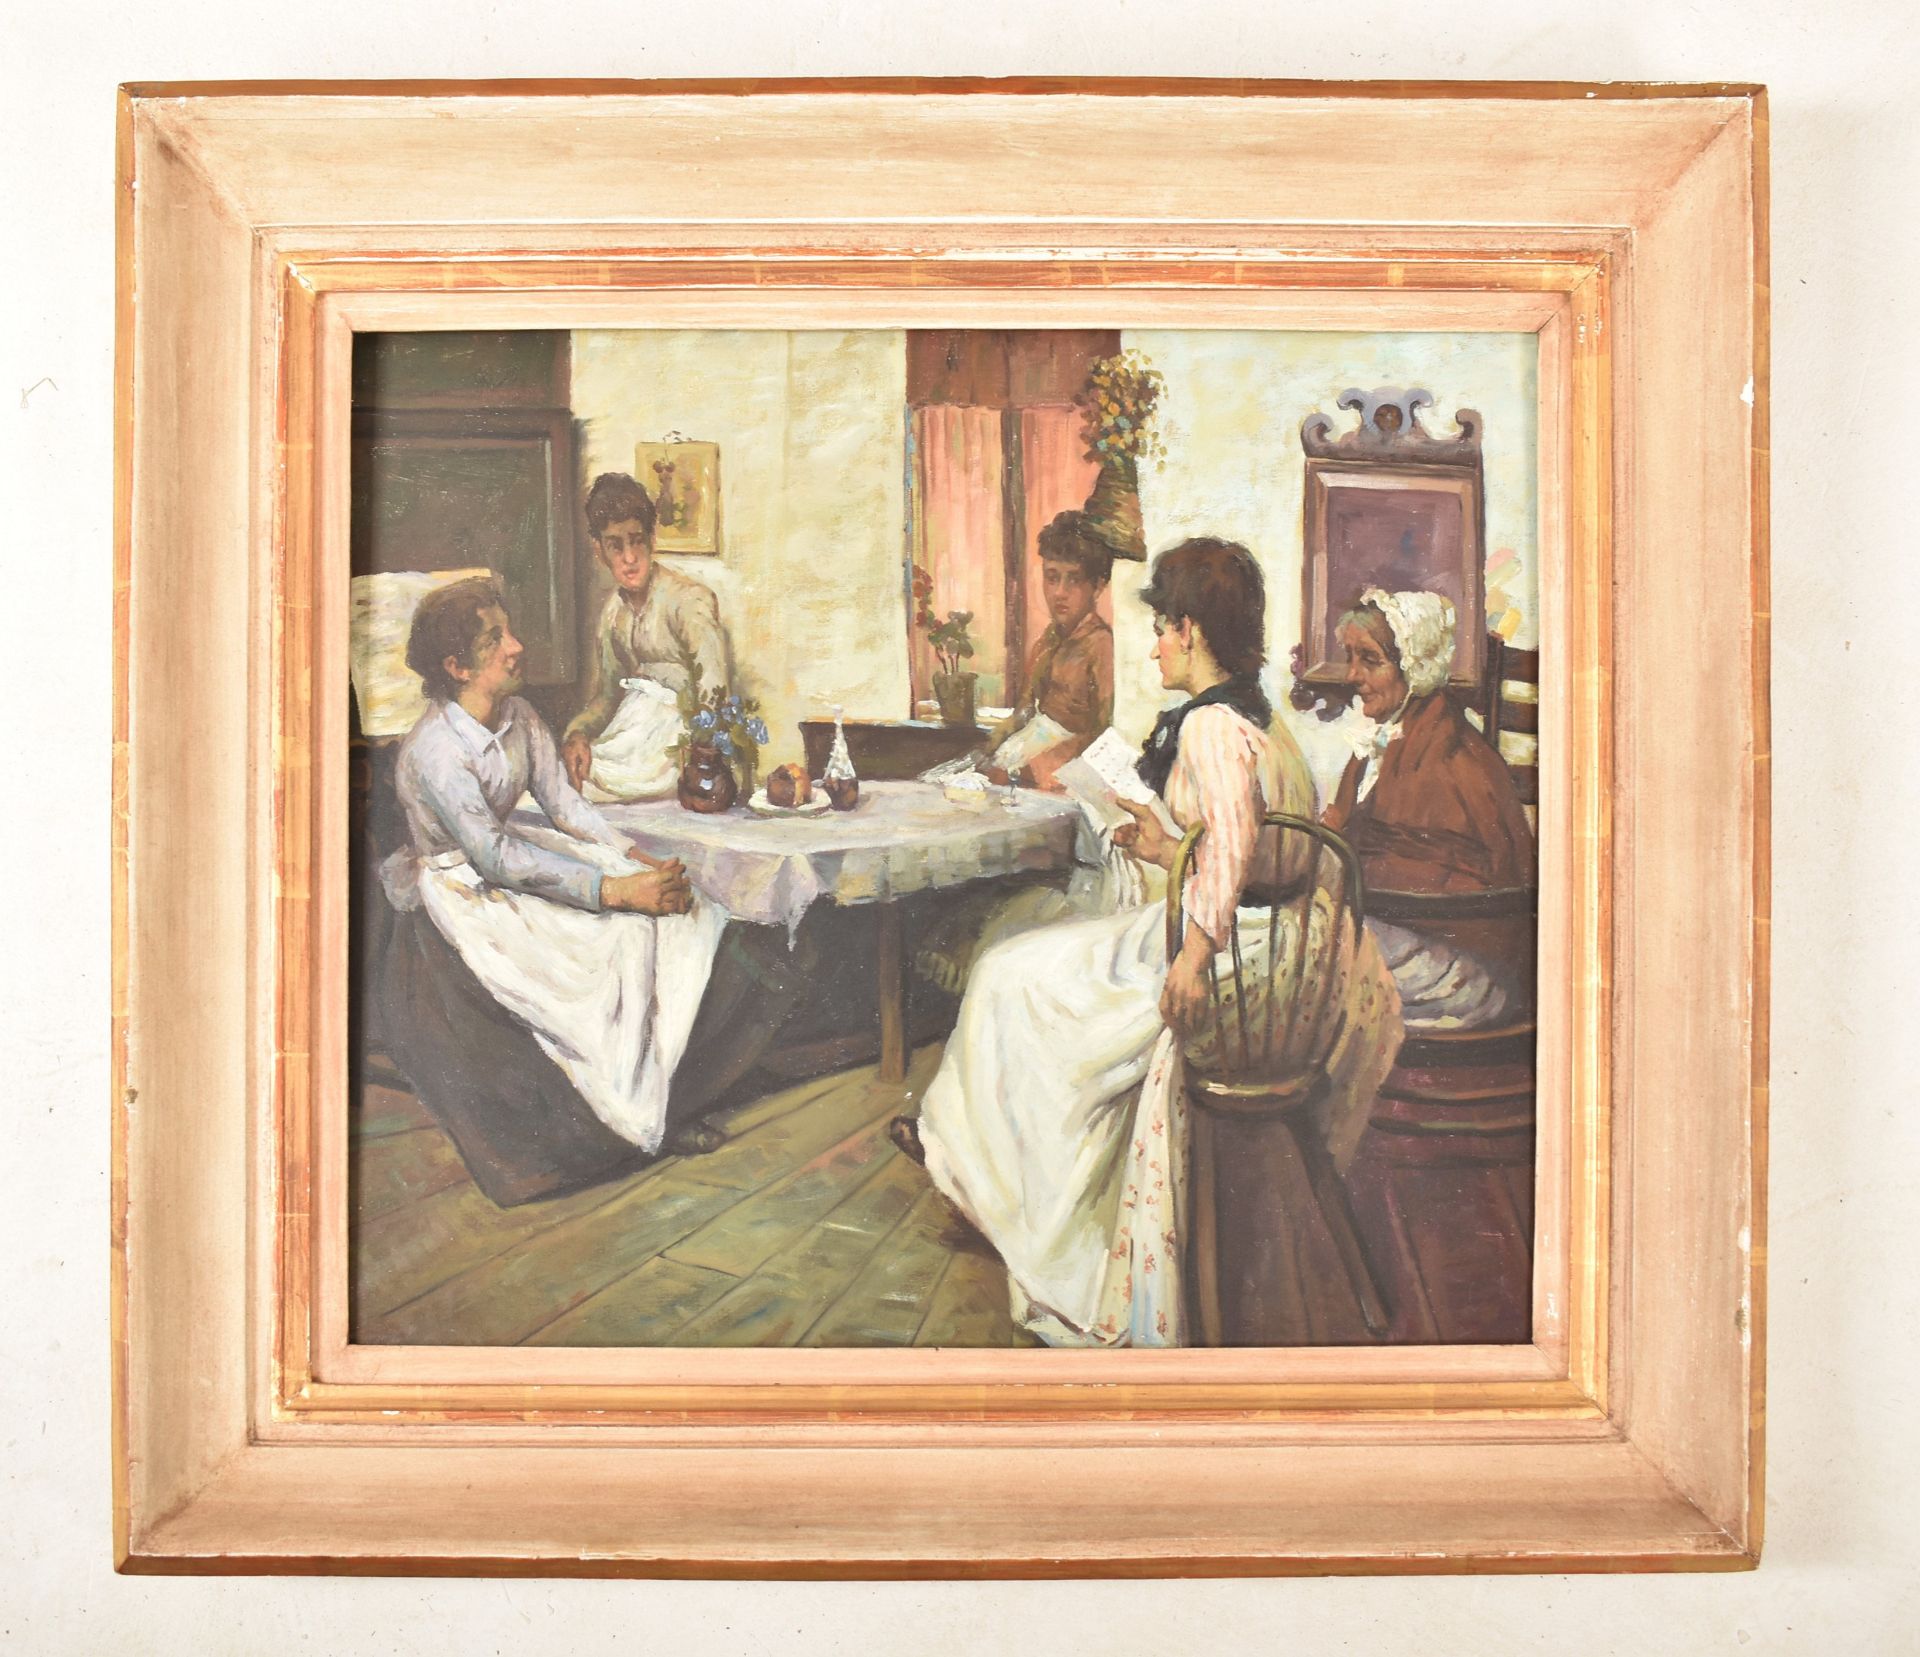 CONTINENTAL MID 20TH CENTURY OIL PAINTING OF FIVE WOMEN - Image 2 of 5